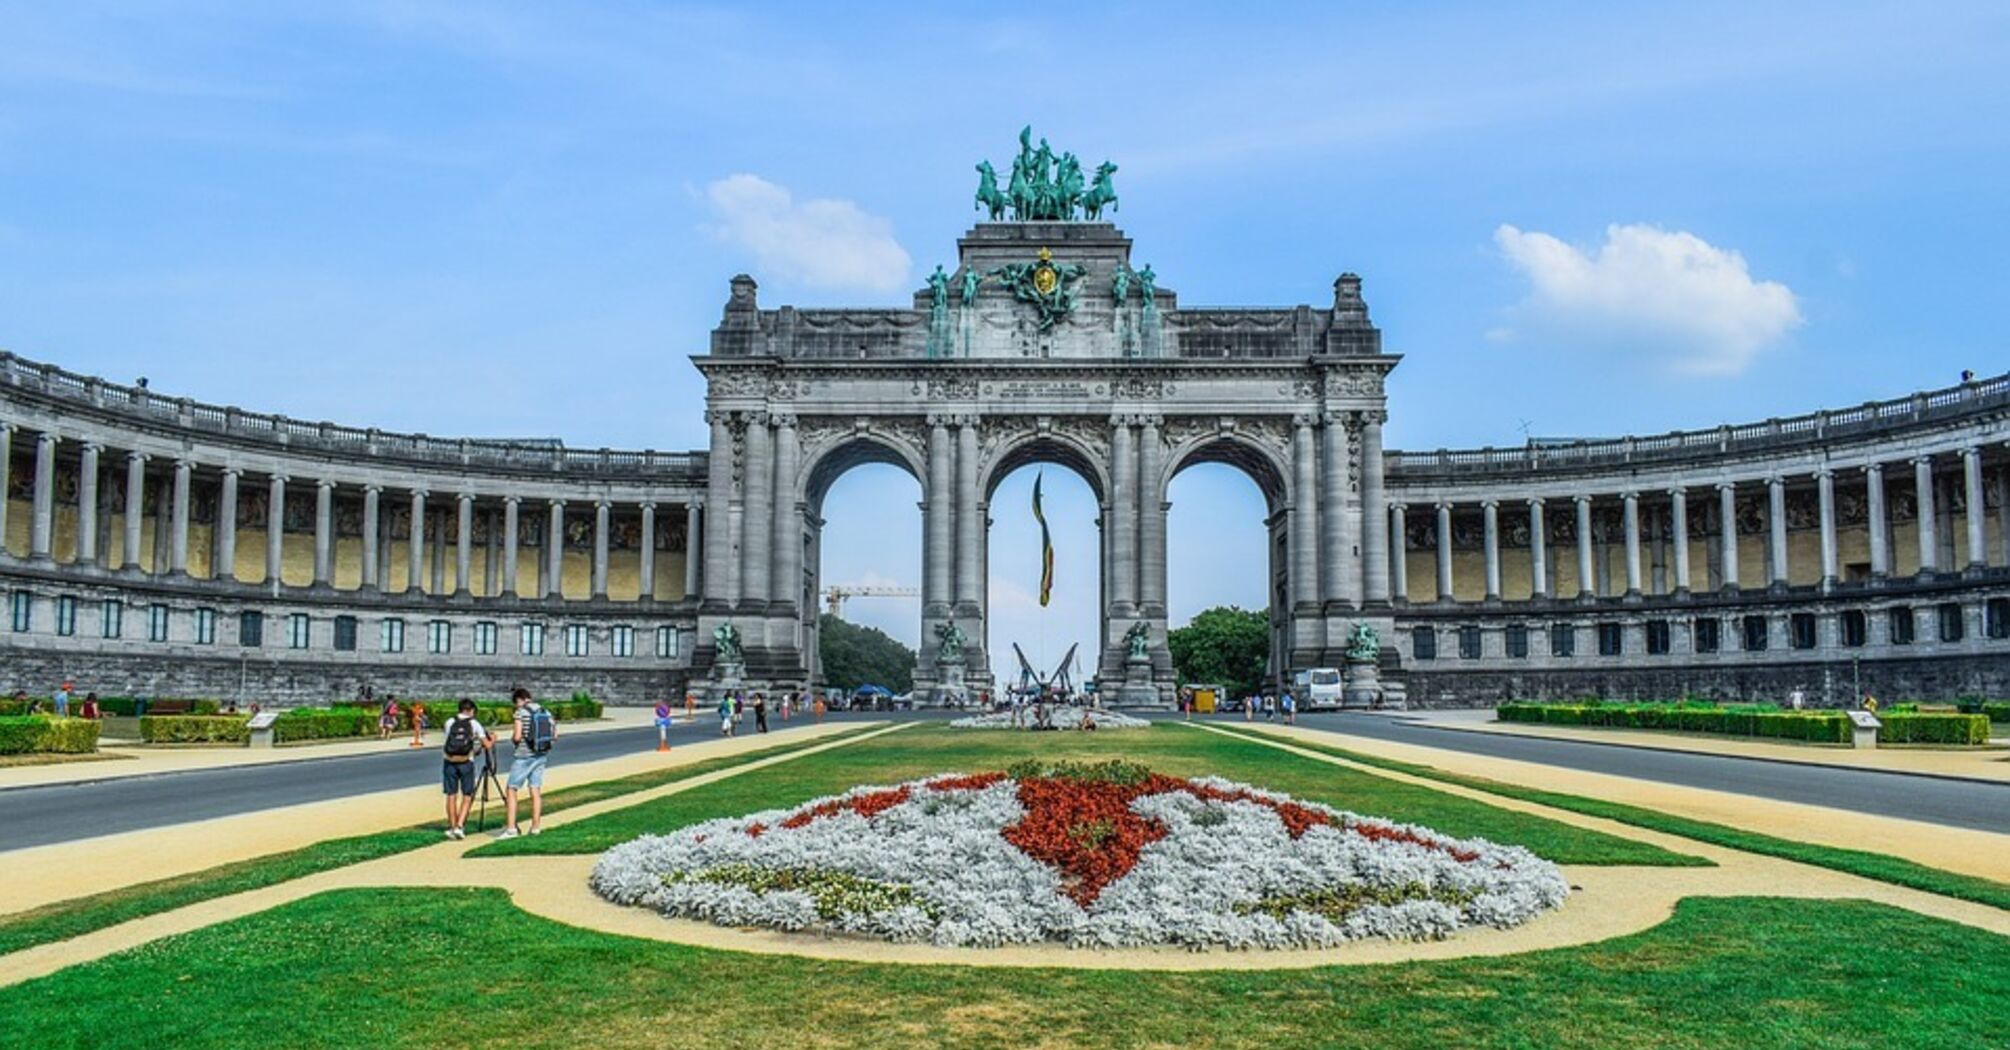 Top 10 places in the heart of Brussels that will give you an unforgettable experience